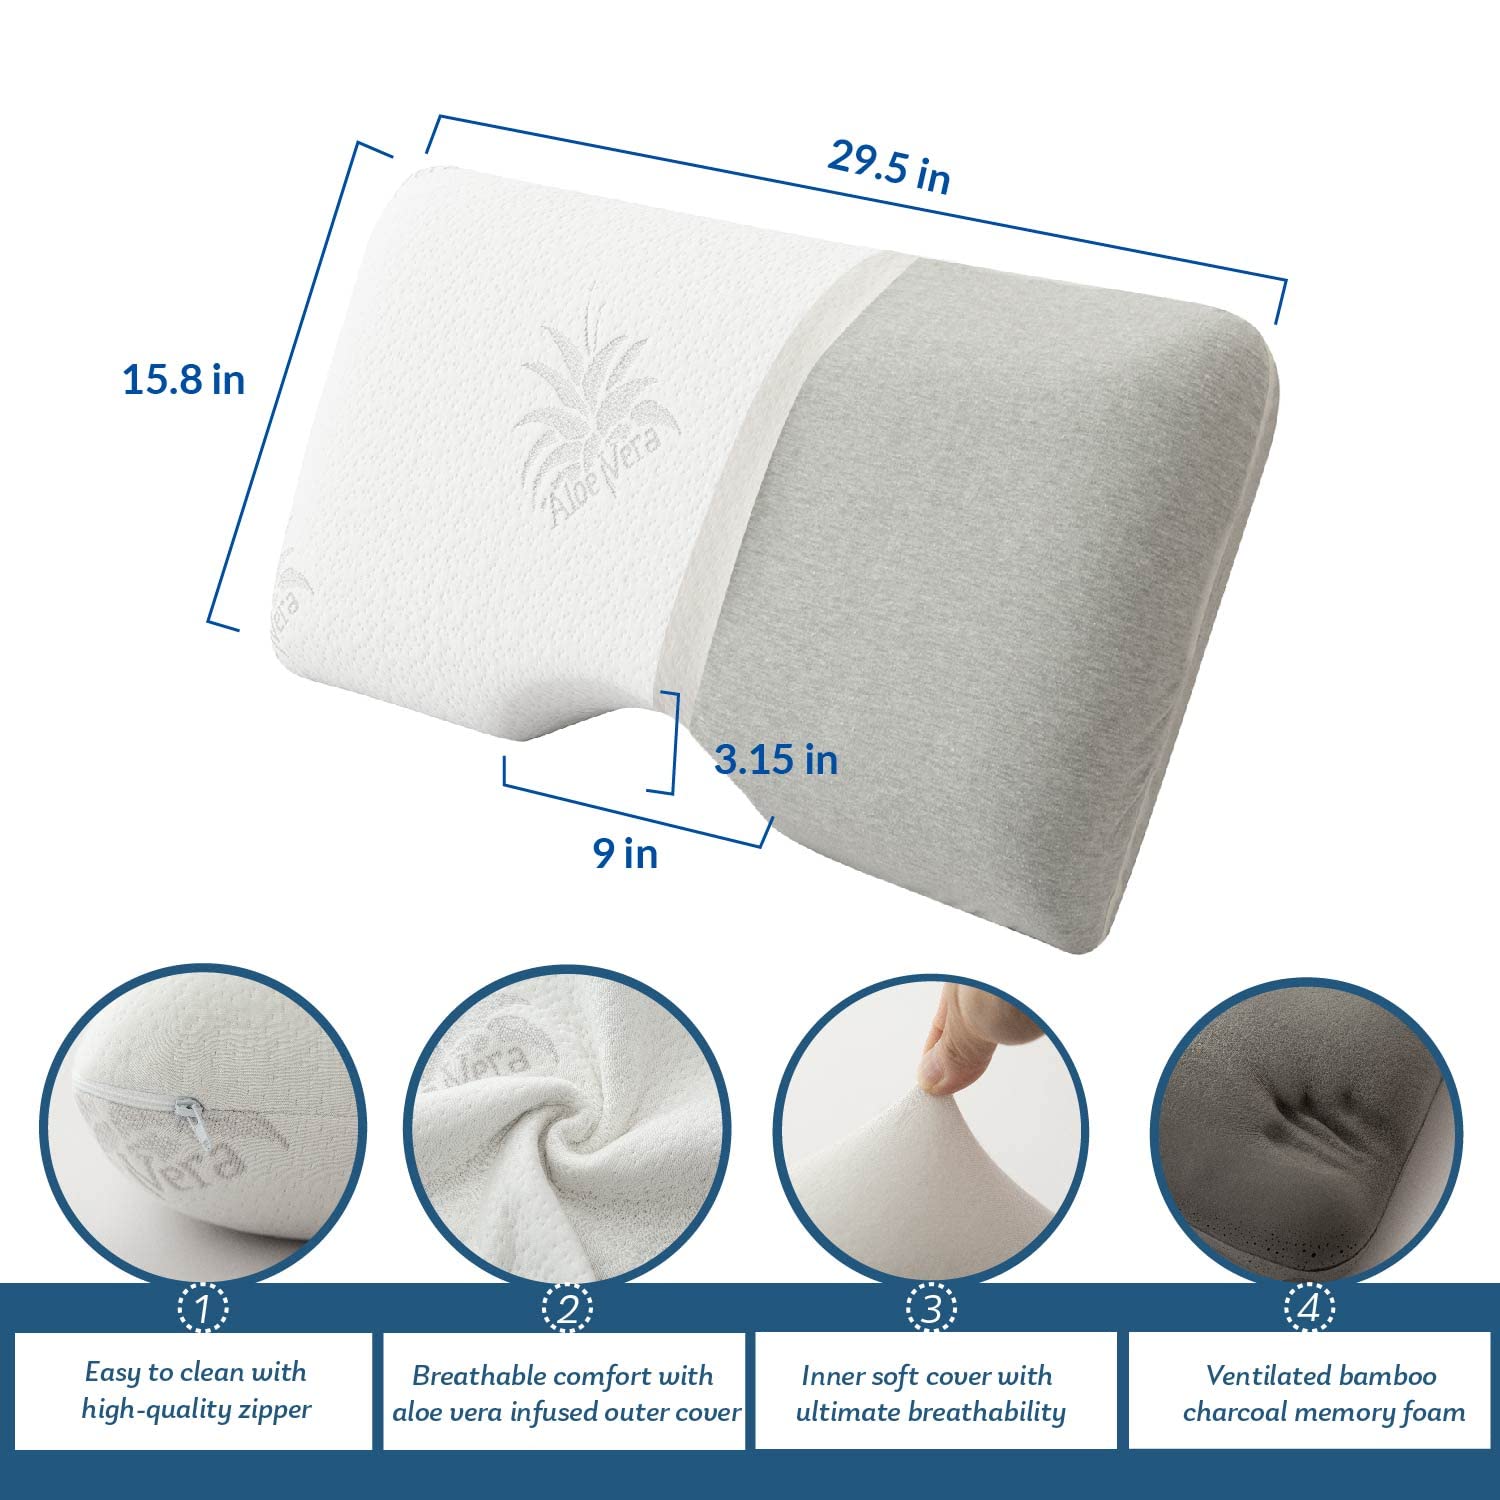 MLILY Side Sleeper Pillow, Cervical Pillow for Neck Pain, Cool Bamboo Charcoal Infused Memory Foam Pillow, Aloe Vera Skin Friendly, Medium Firm, 30x16 Inches